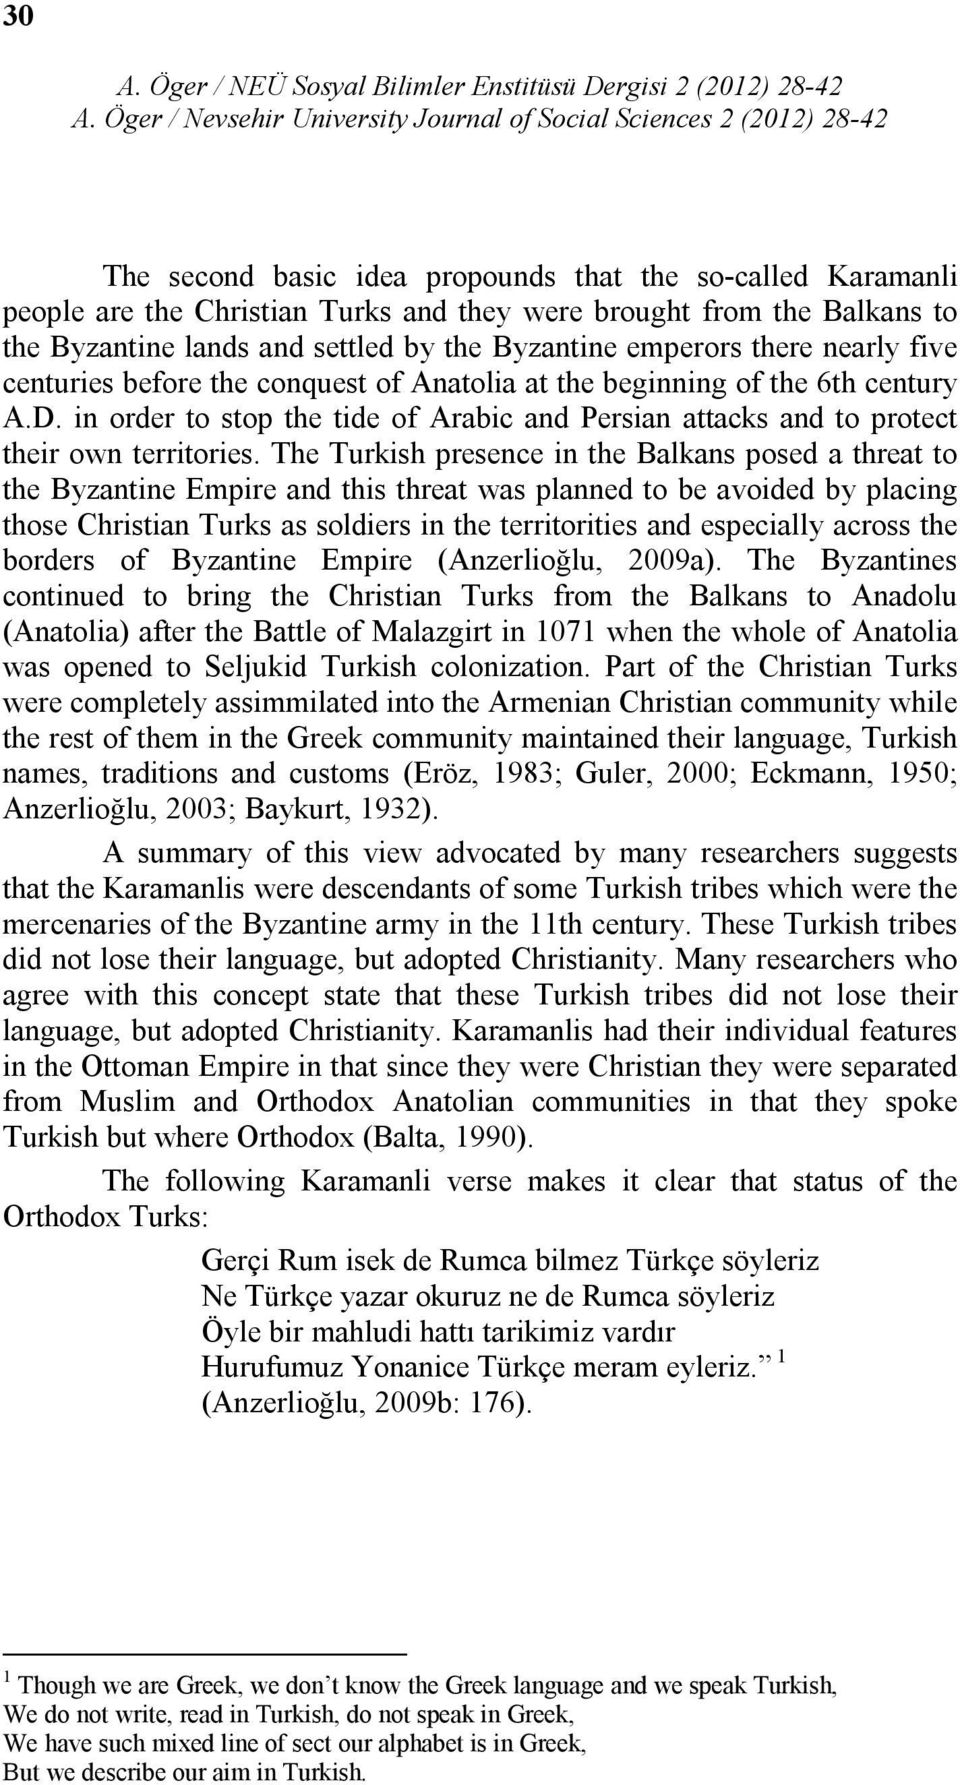 The Turkish presence in the Balkans posed a threat to the Byzantine Empire and this threat was planned to be avoided by placing those Christian Turks as soldiers in the territorities and especially